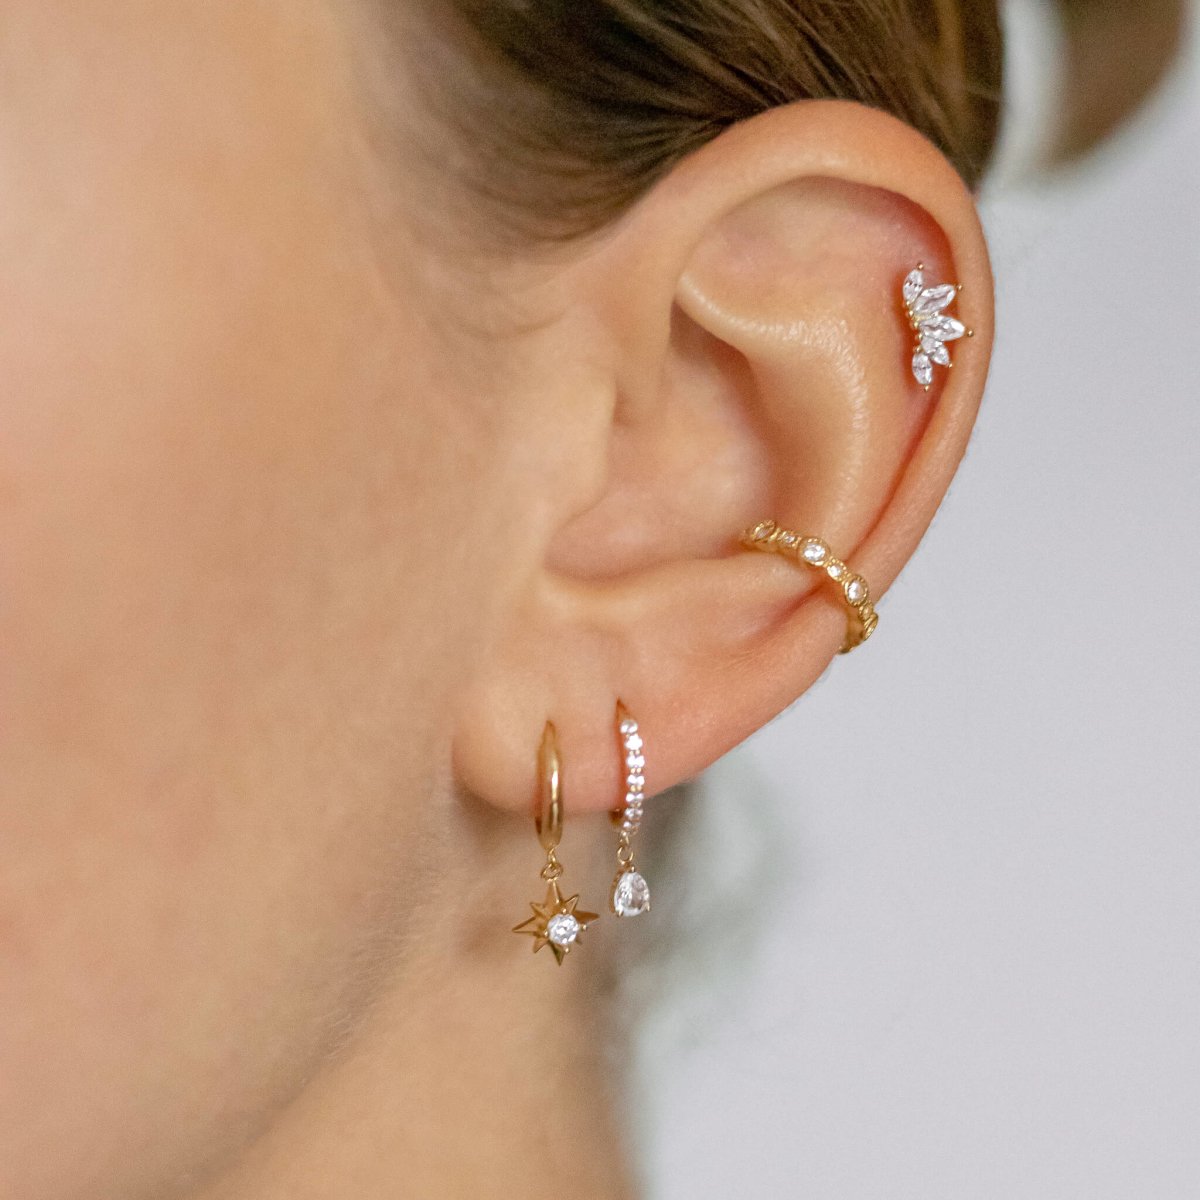 EARCUFF ANTIBES - 925 sterling silver / 24K gold